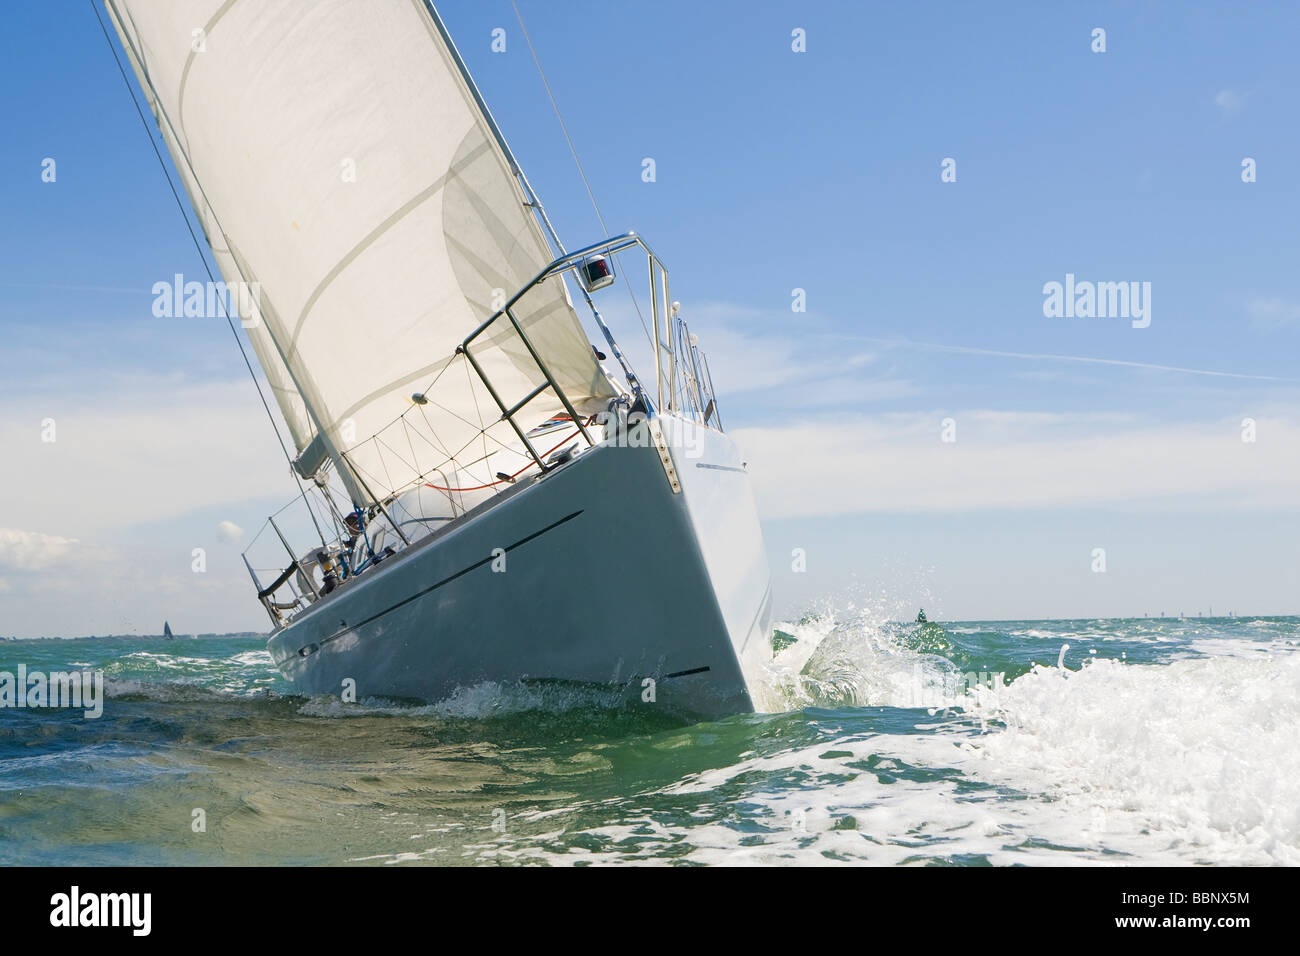 A beautiful white yachts racing close to the camera on a bright sunny day Stock Photo